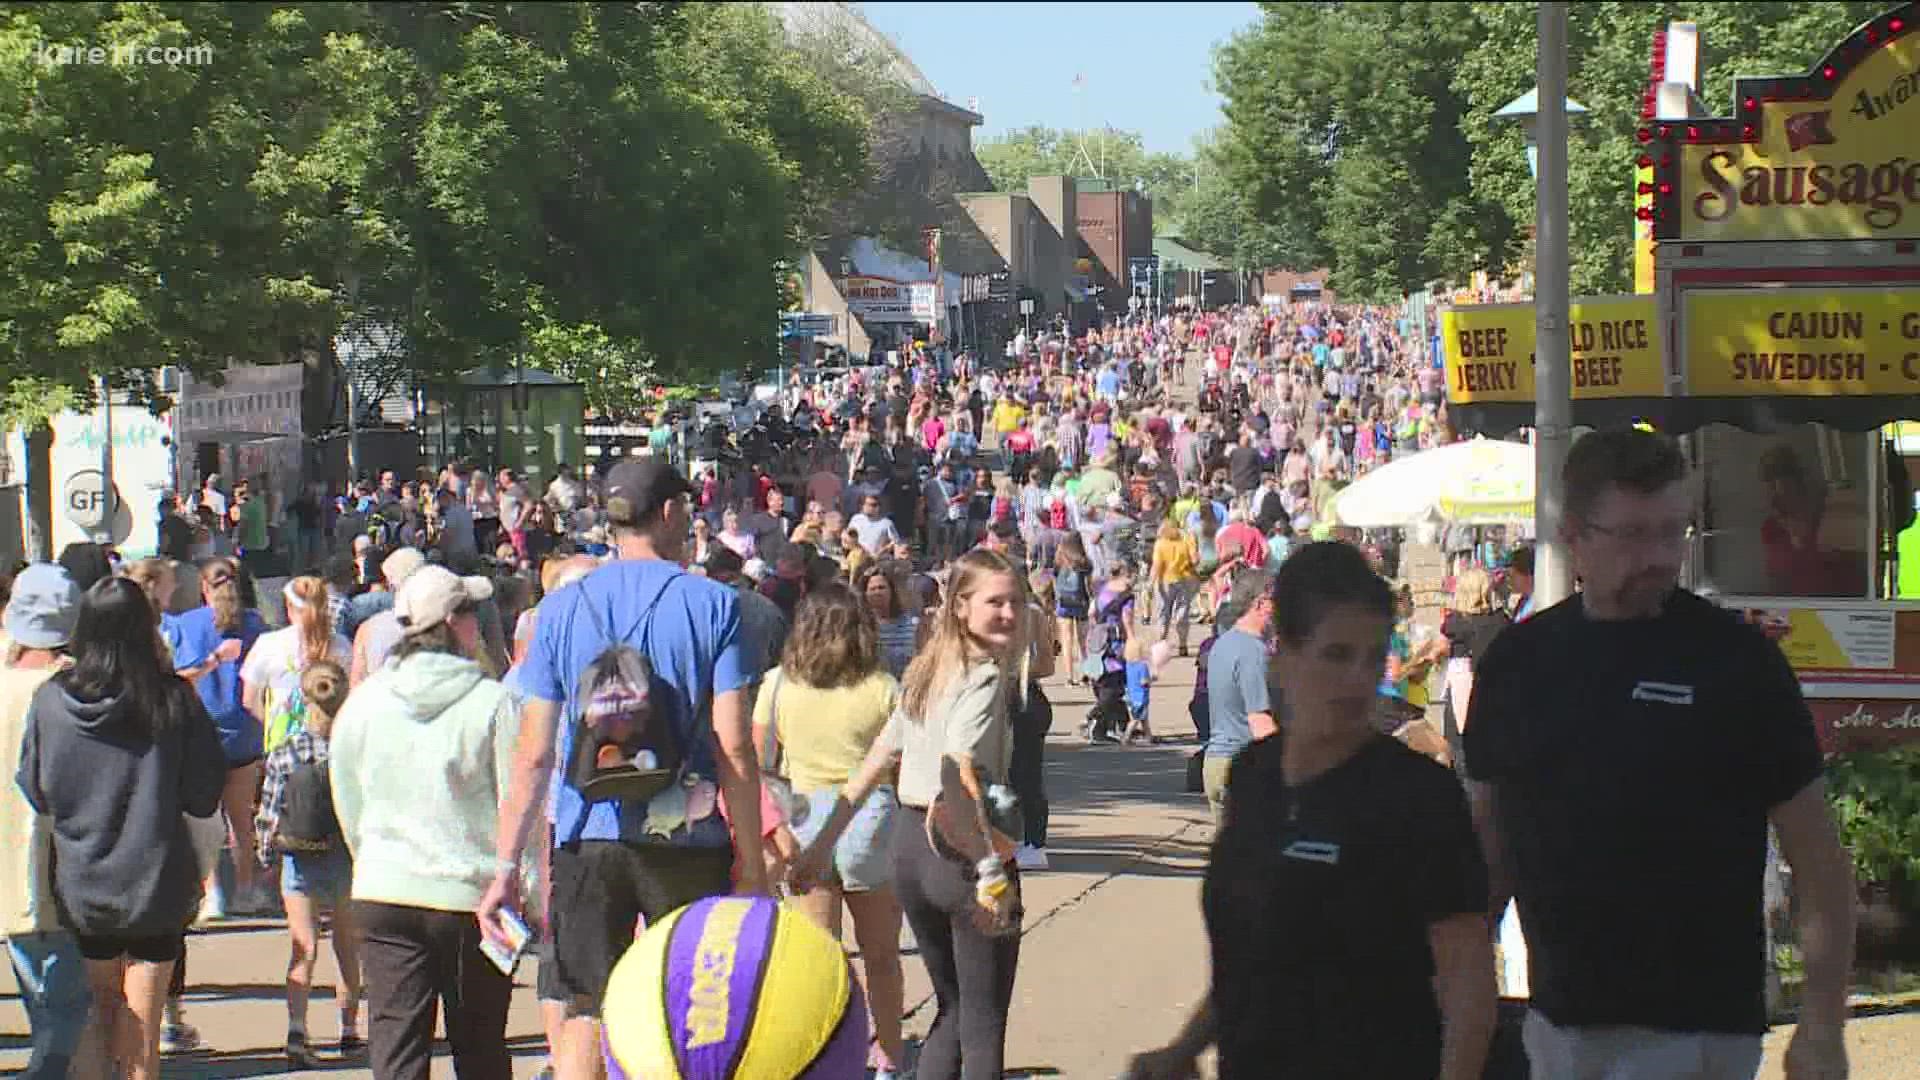 Labor Day marks the last day of the 2021 Minnesota State Fair.